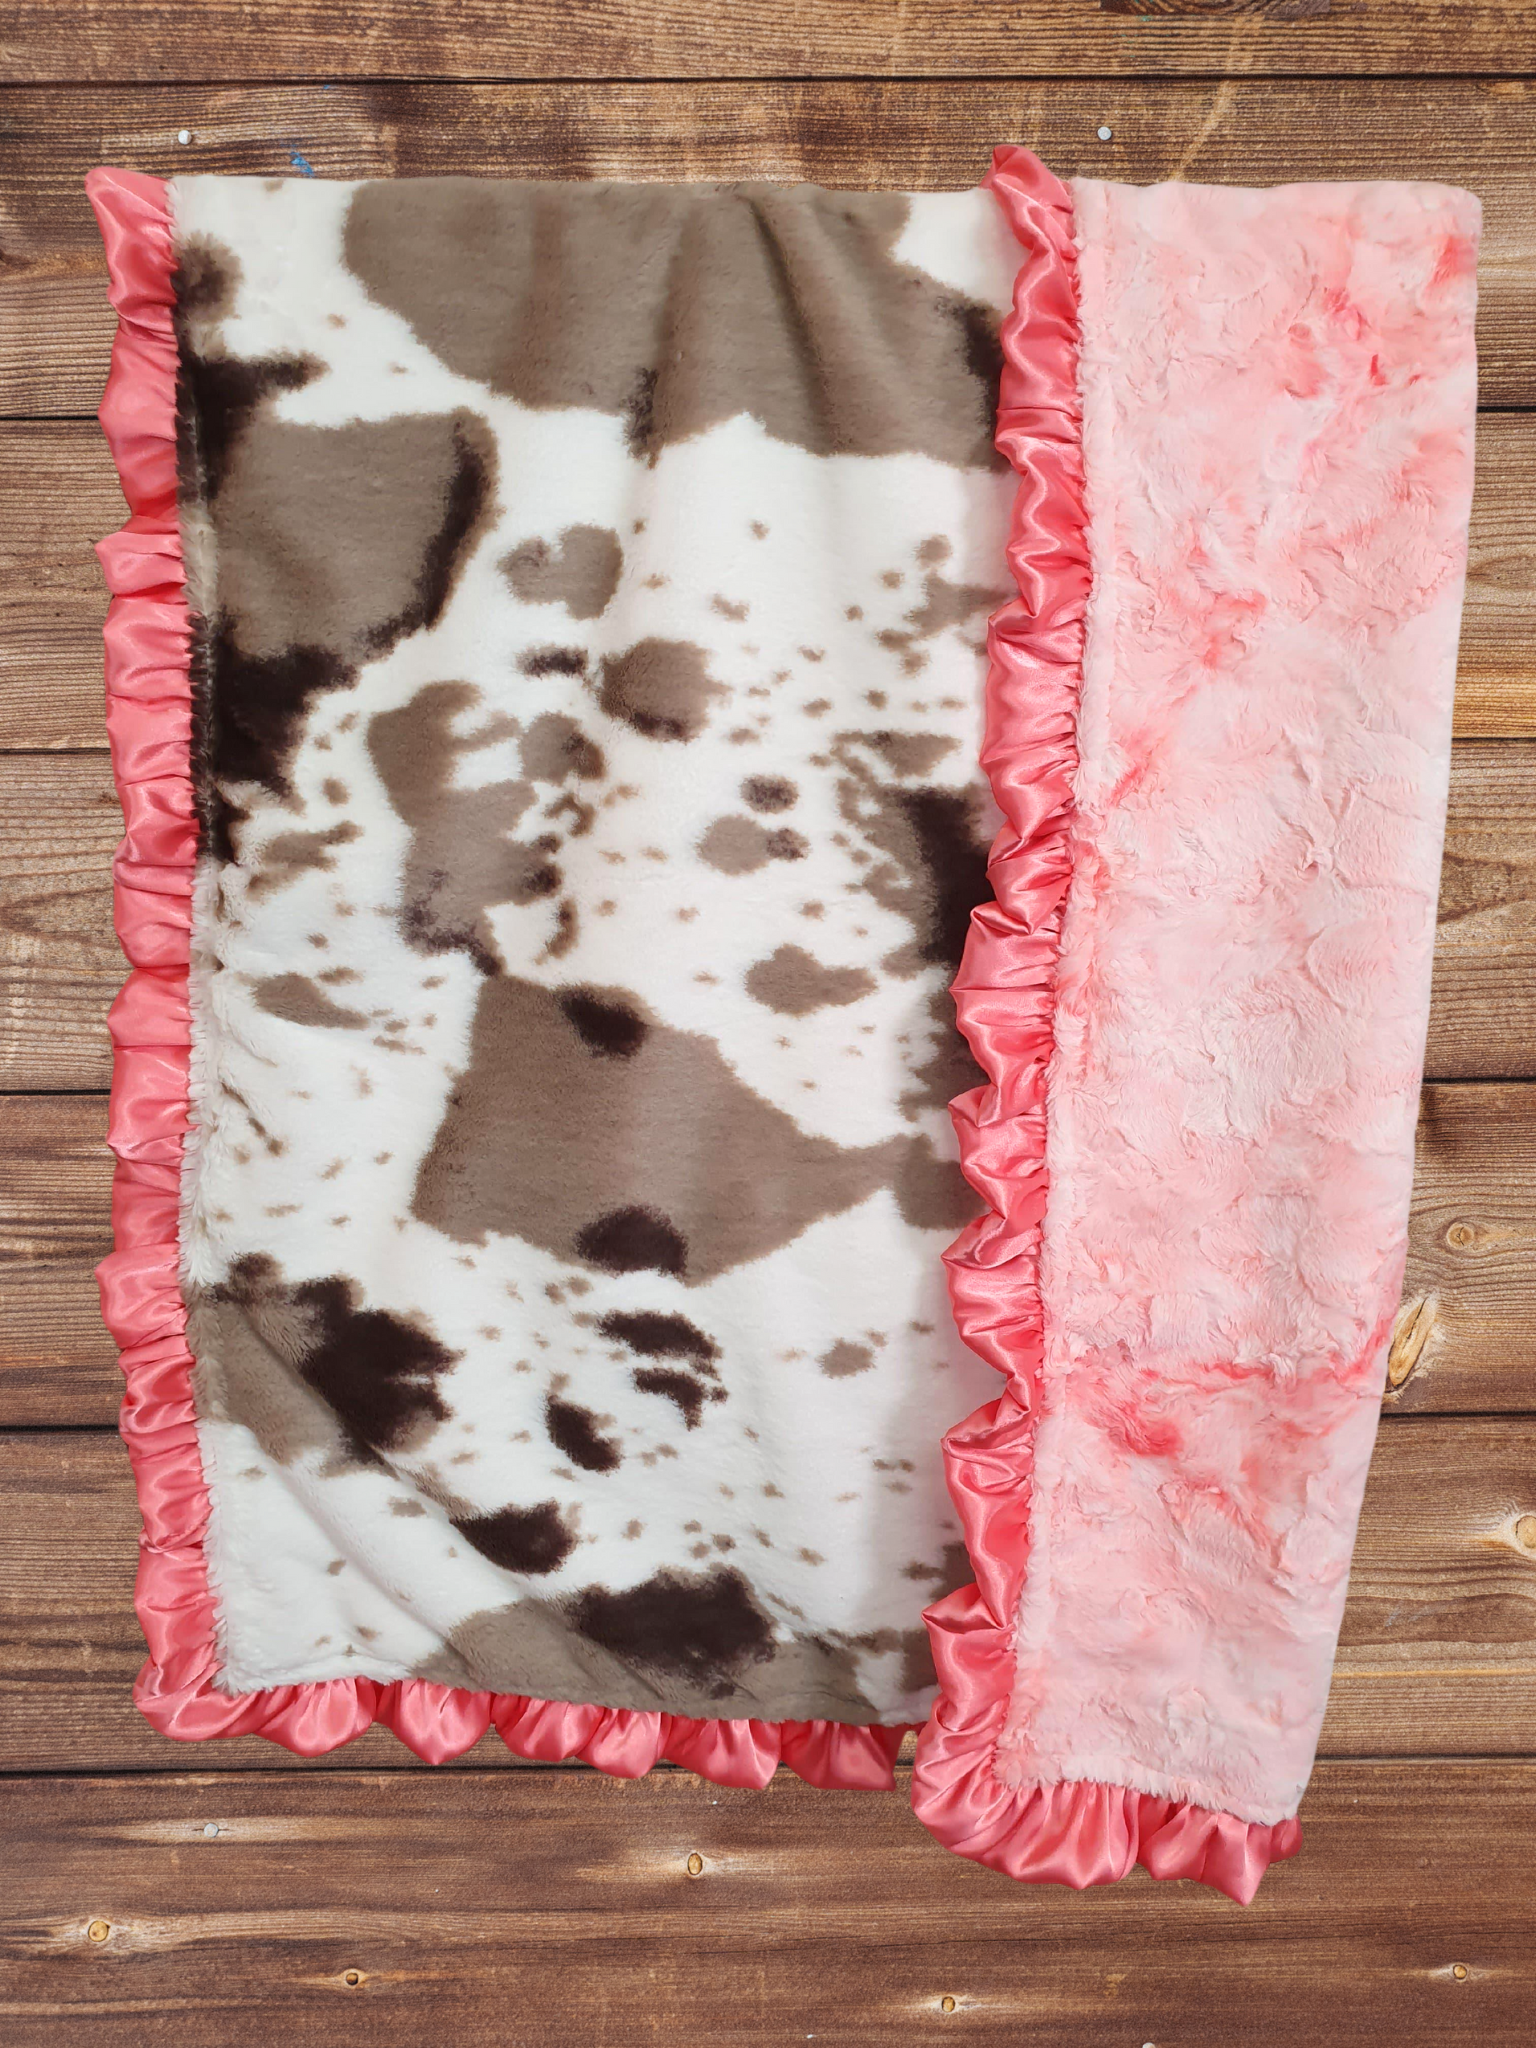 Ruffle Baby Blanket - Brown Sugar Cow and Blossom Minky Western Blanket - DBC Baby Bedding Co 